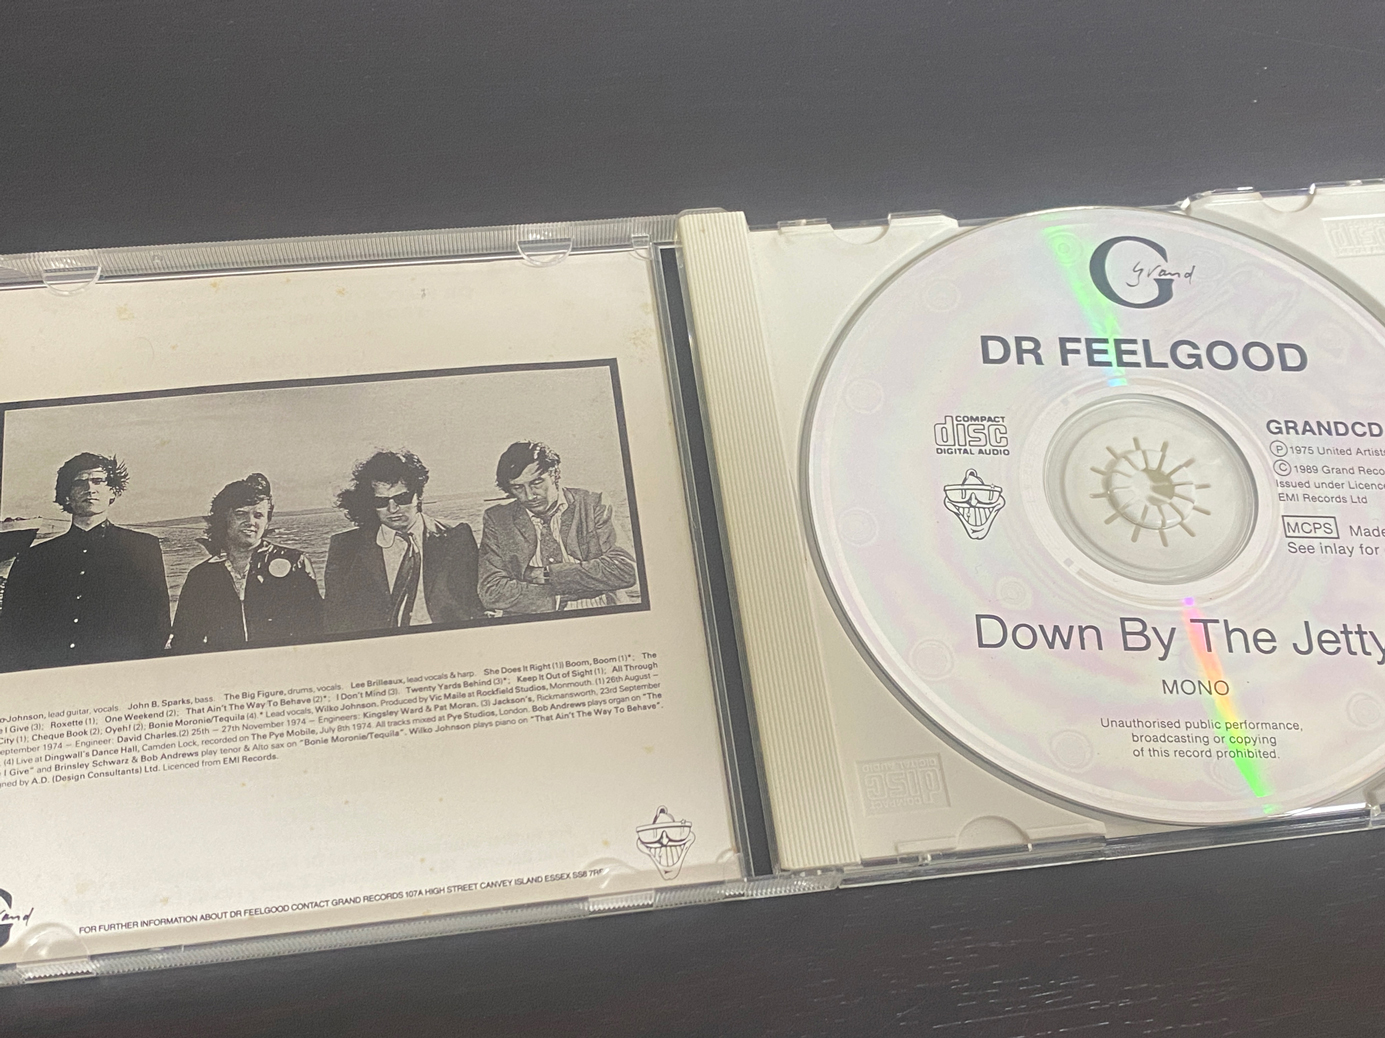 DR. FEELGOOD「Down By The Jetty」の収録曲